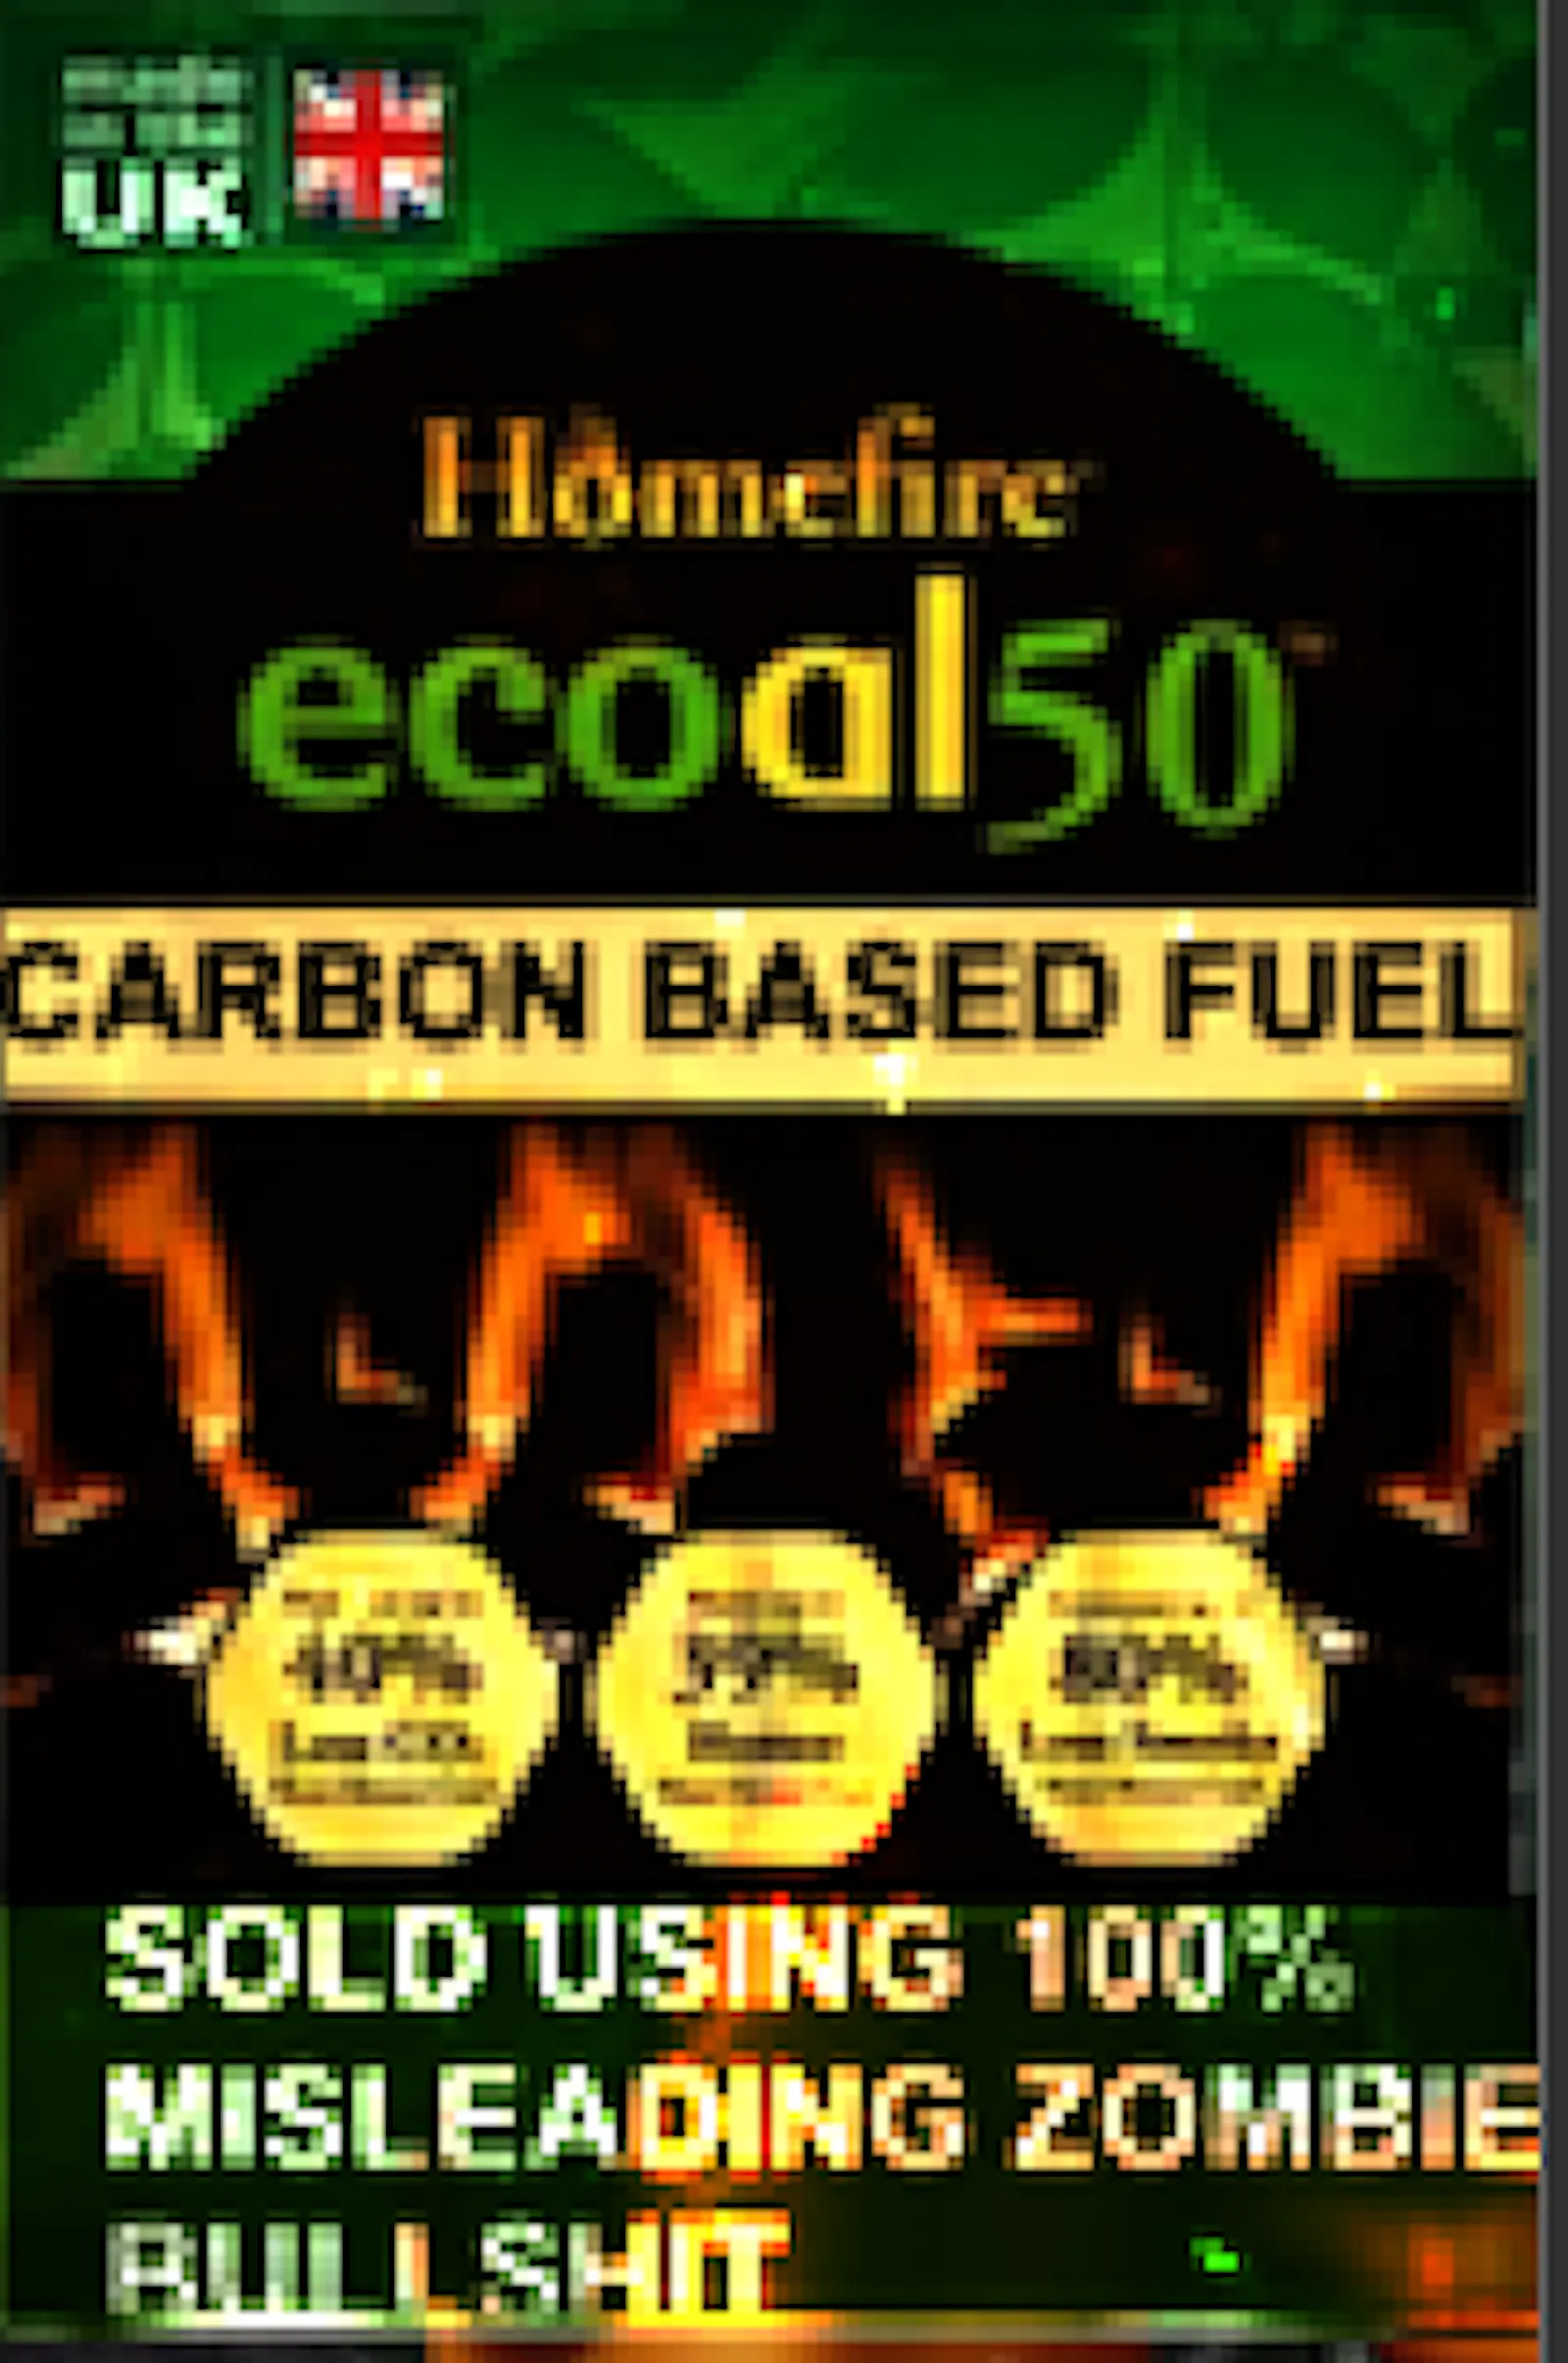 An image shows the 'Homefire ecoal50' product that is sold in the UK. The manufactures use misleading claims to sell their harmful product. I added the "sold using 100% misleading zombie bullshit" text to mitigate the greenwash effect.